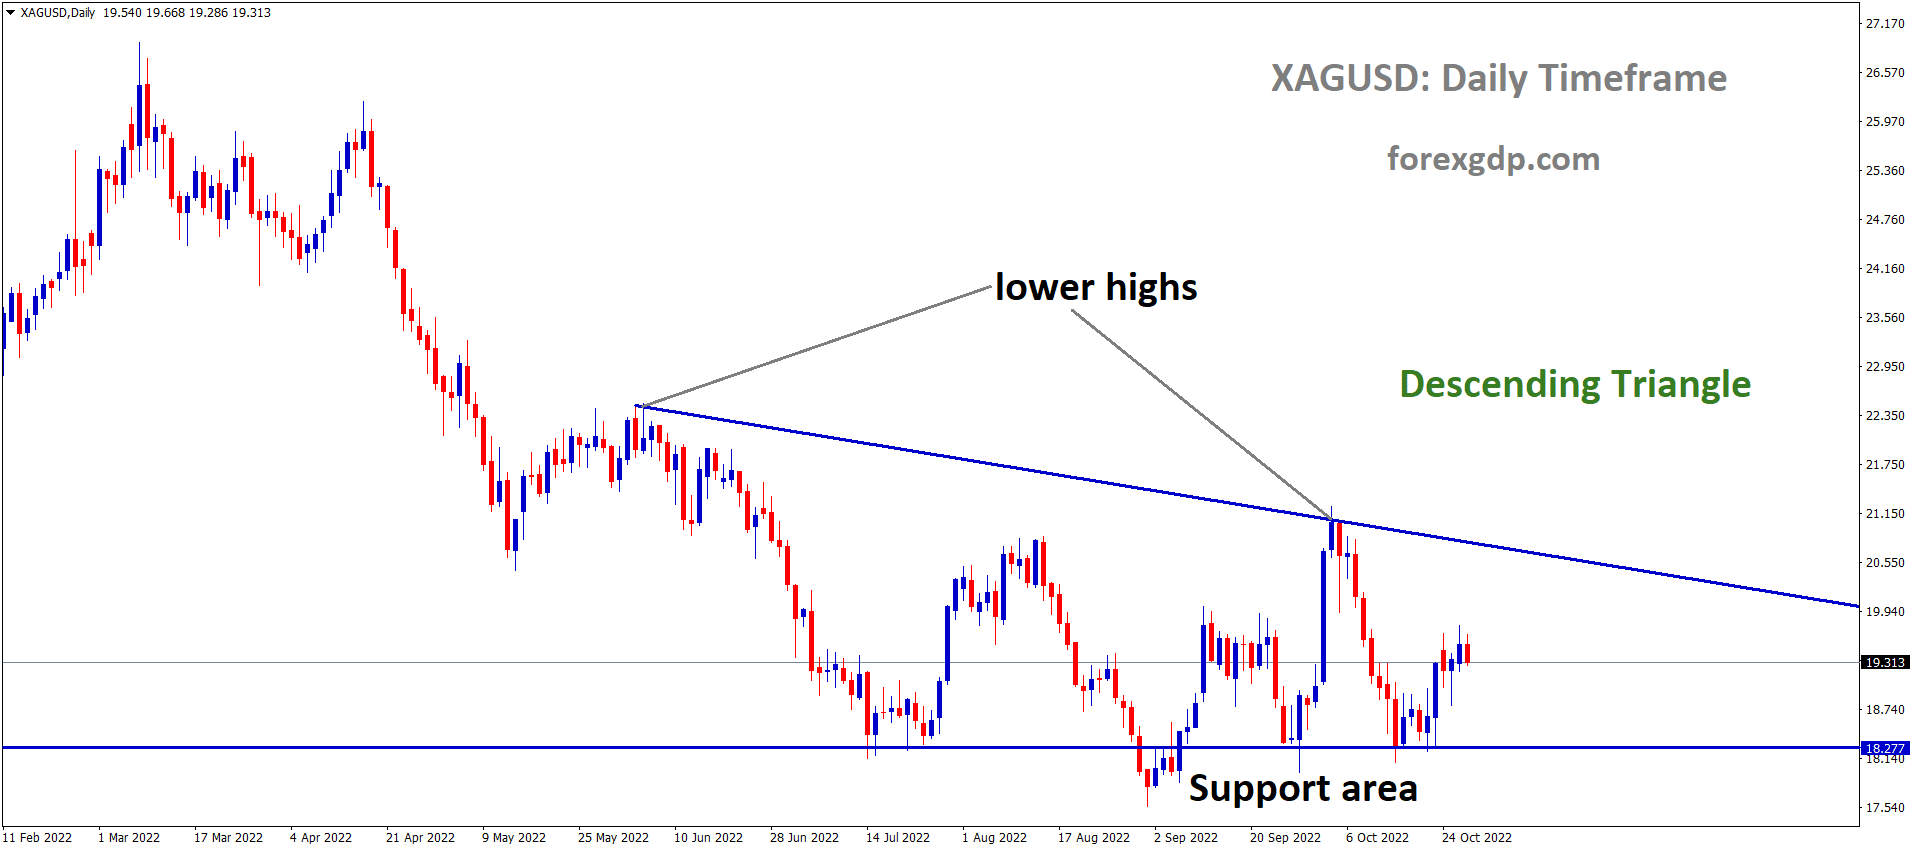 XAGUSD Silver price is moving in the Descending triangle pattern and the market has rebounded from the horizontal support area of the pattern.